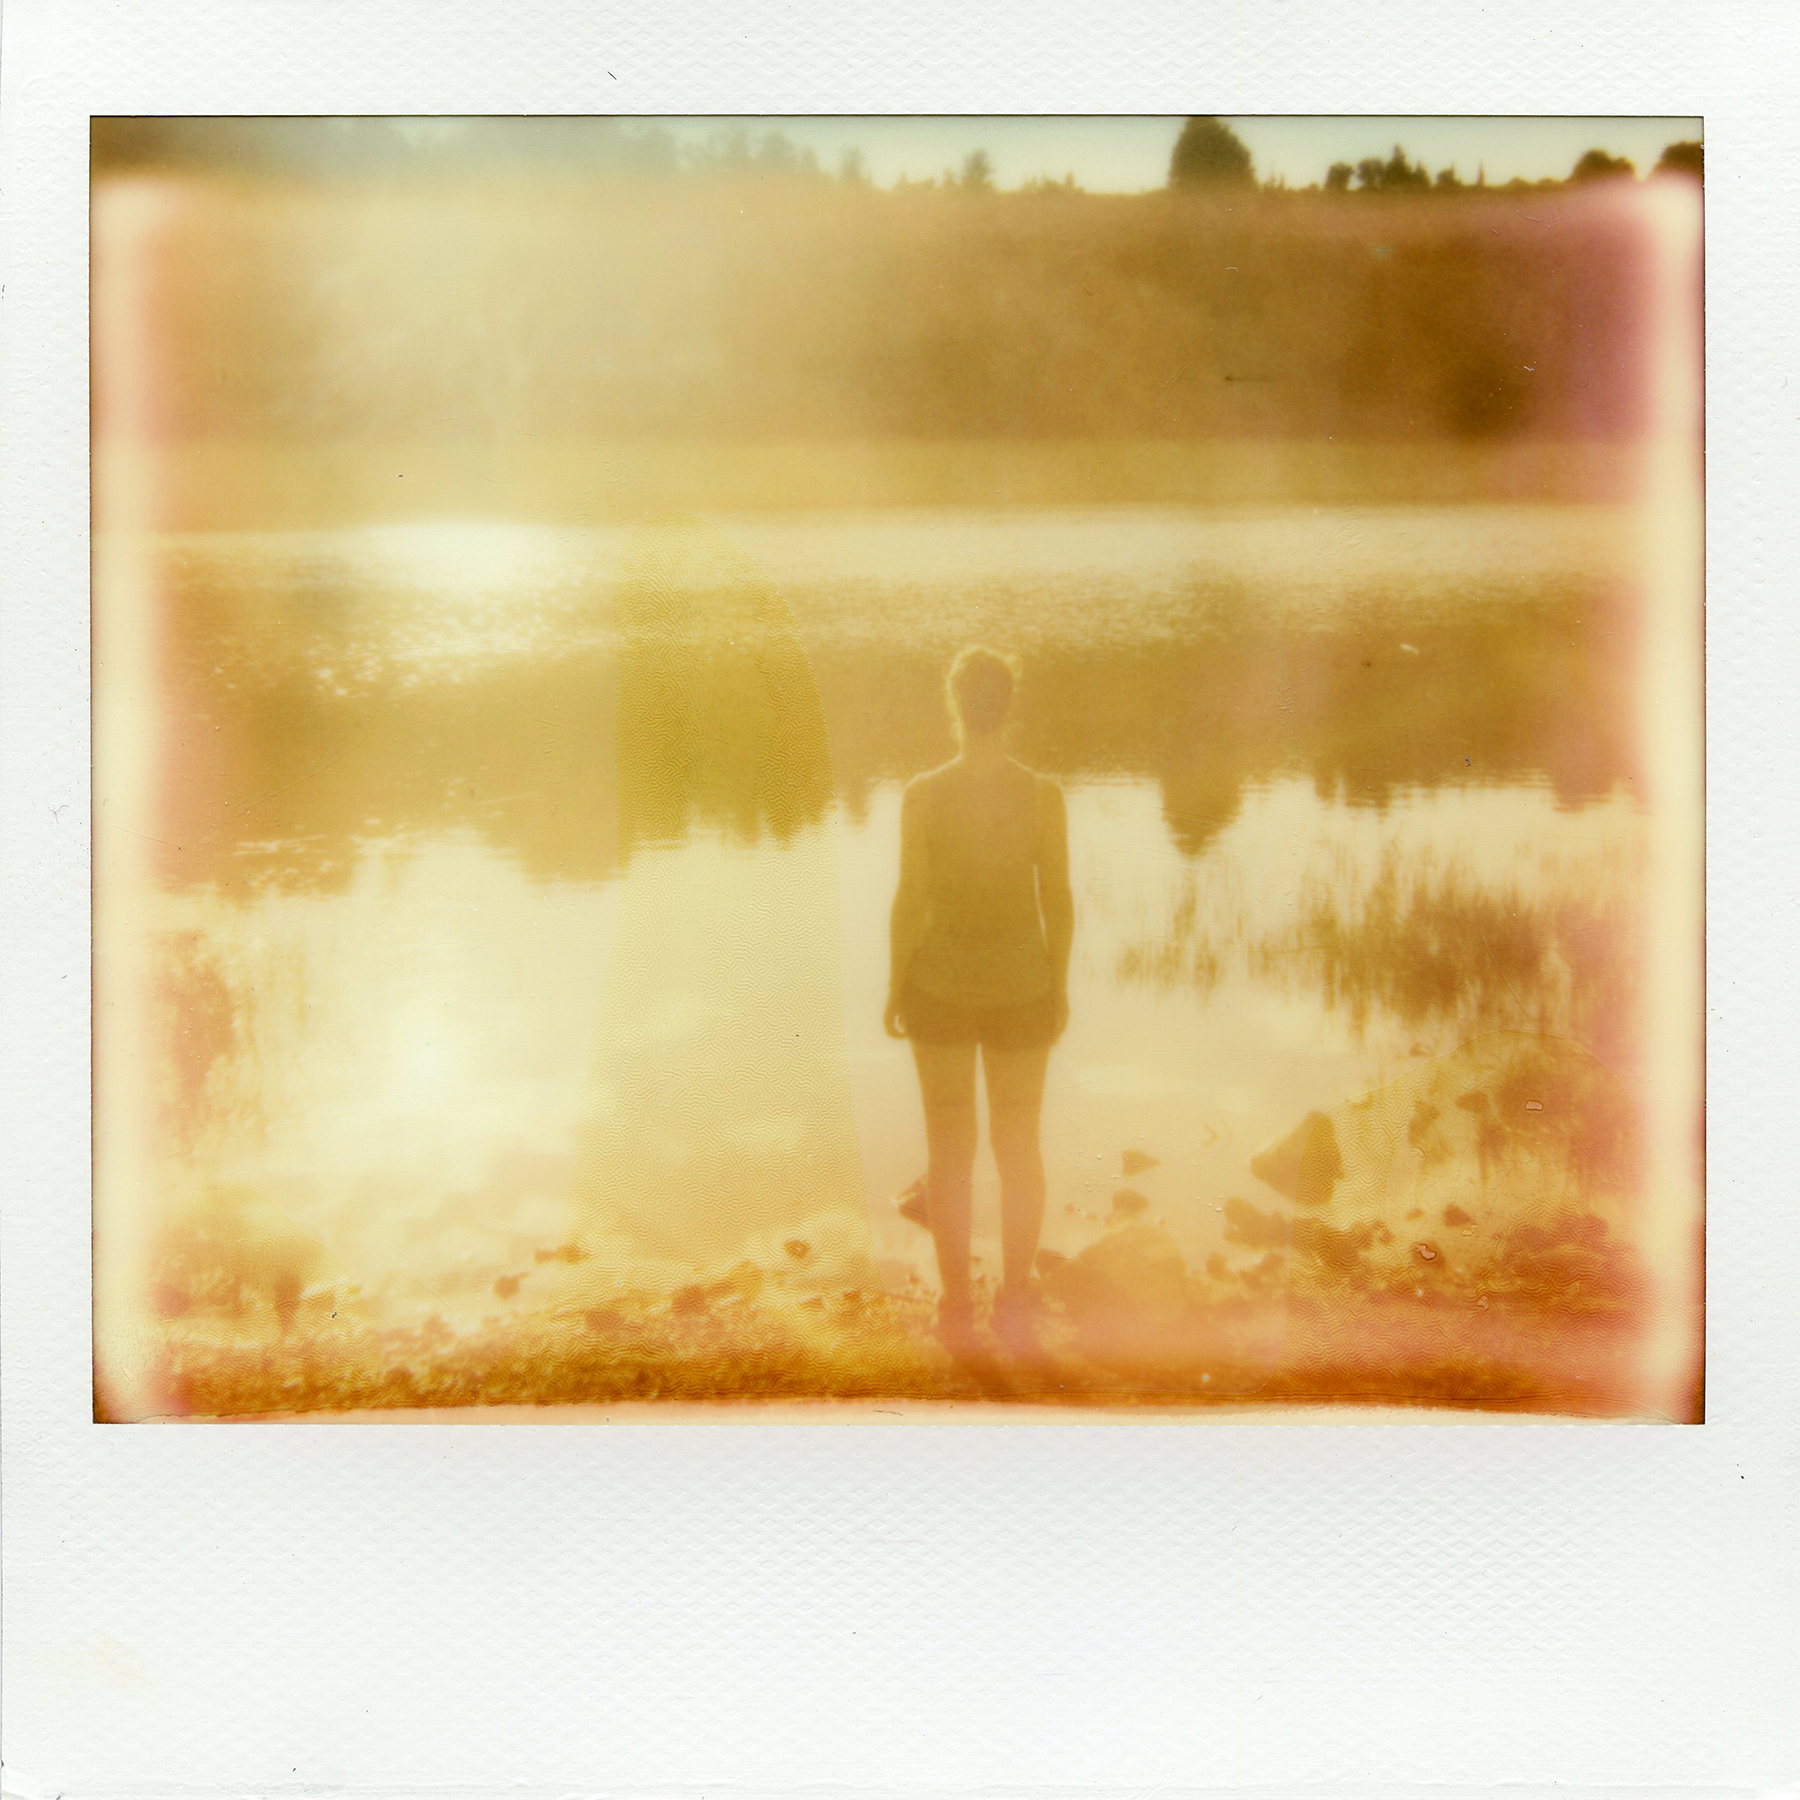 Untitled | Spectra | Impossible Project Spectra Color | La Fille Renne